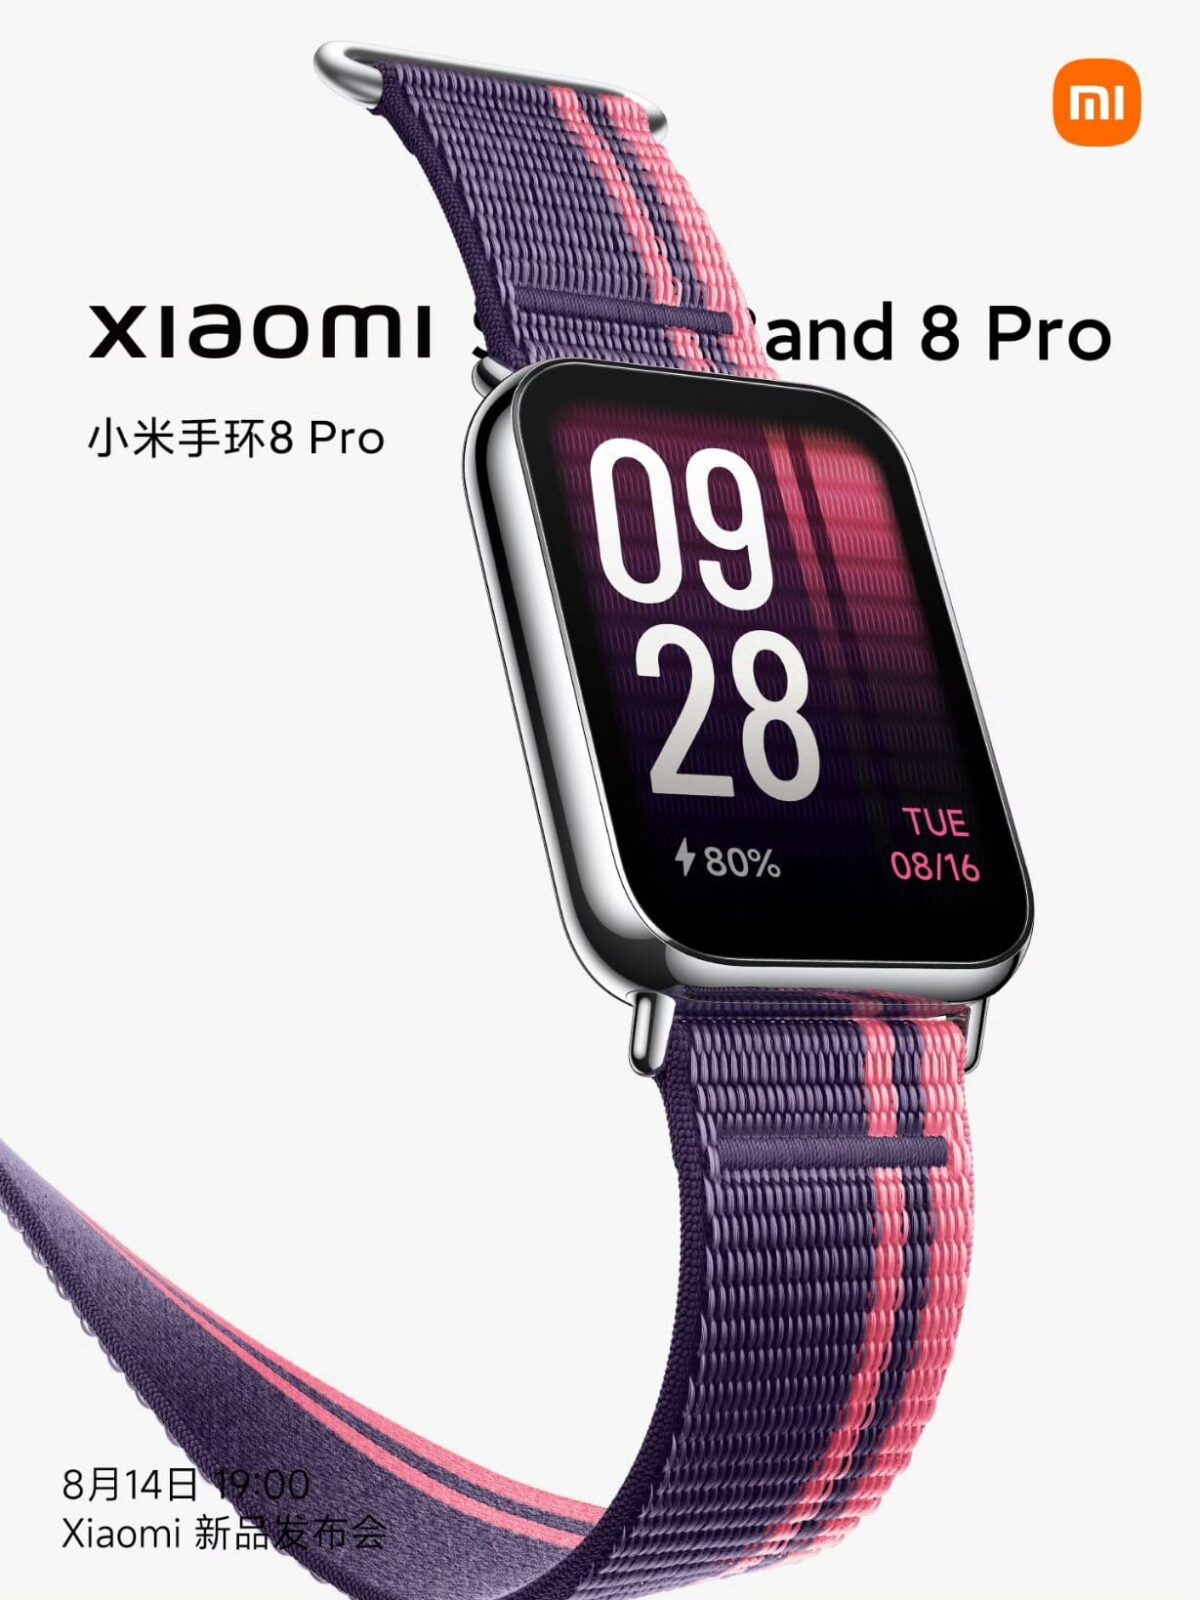 Xiaomi Smart Band 8 Pro Launched in Japan: Now Available for Purchase - The  Tech Outlook